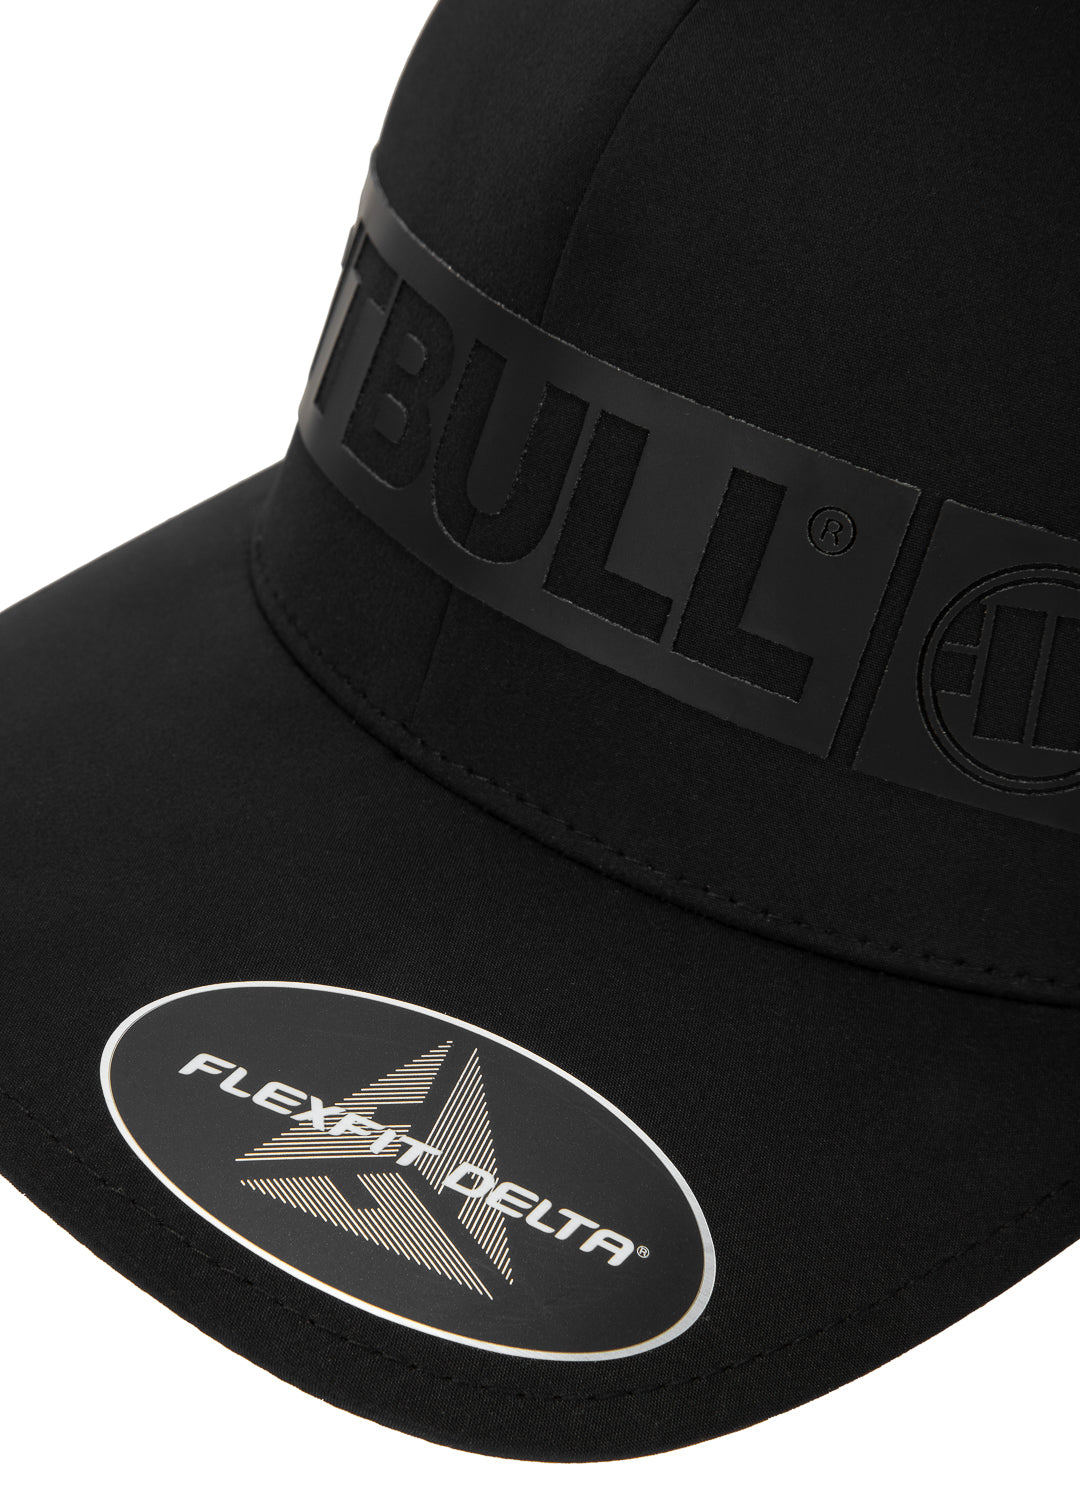 HILLTOP Stretch-Fitted Black Snapback